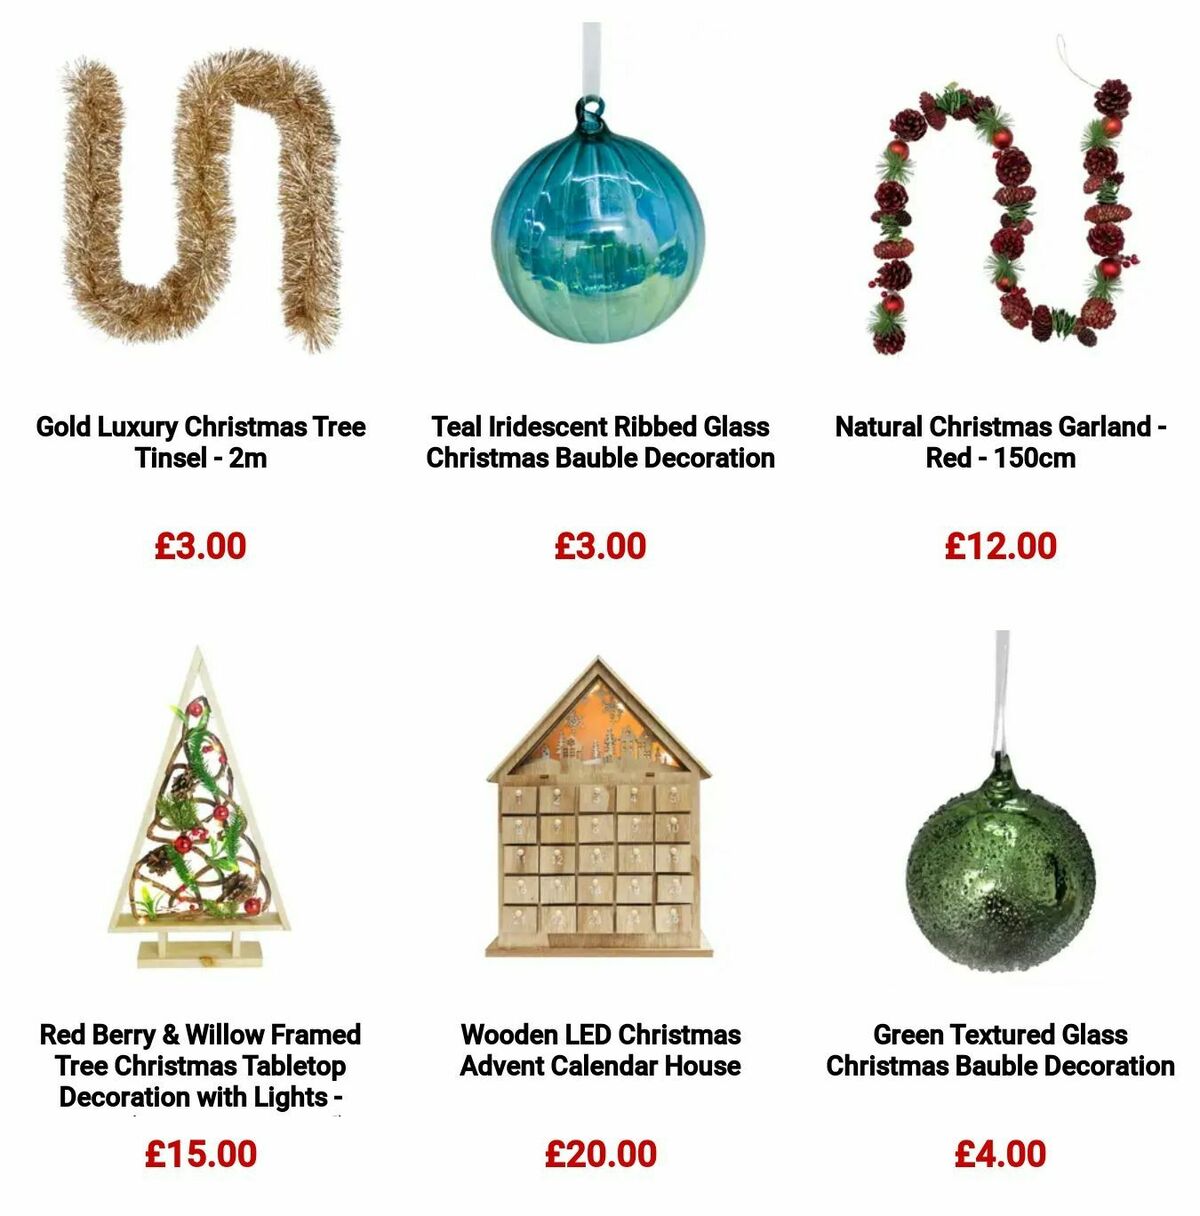 Homebase Christmas Offers from 27 October